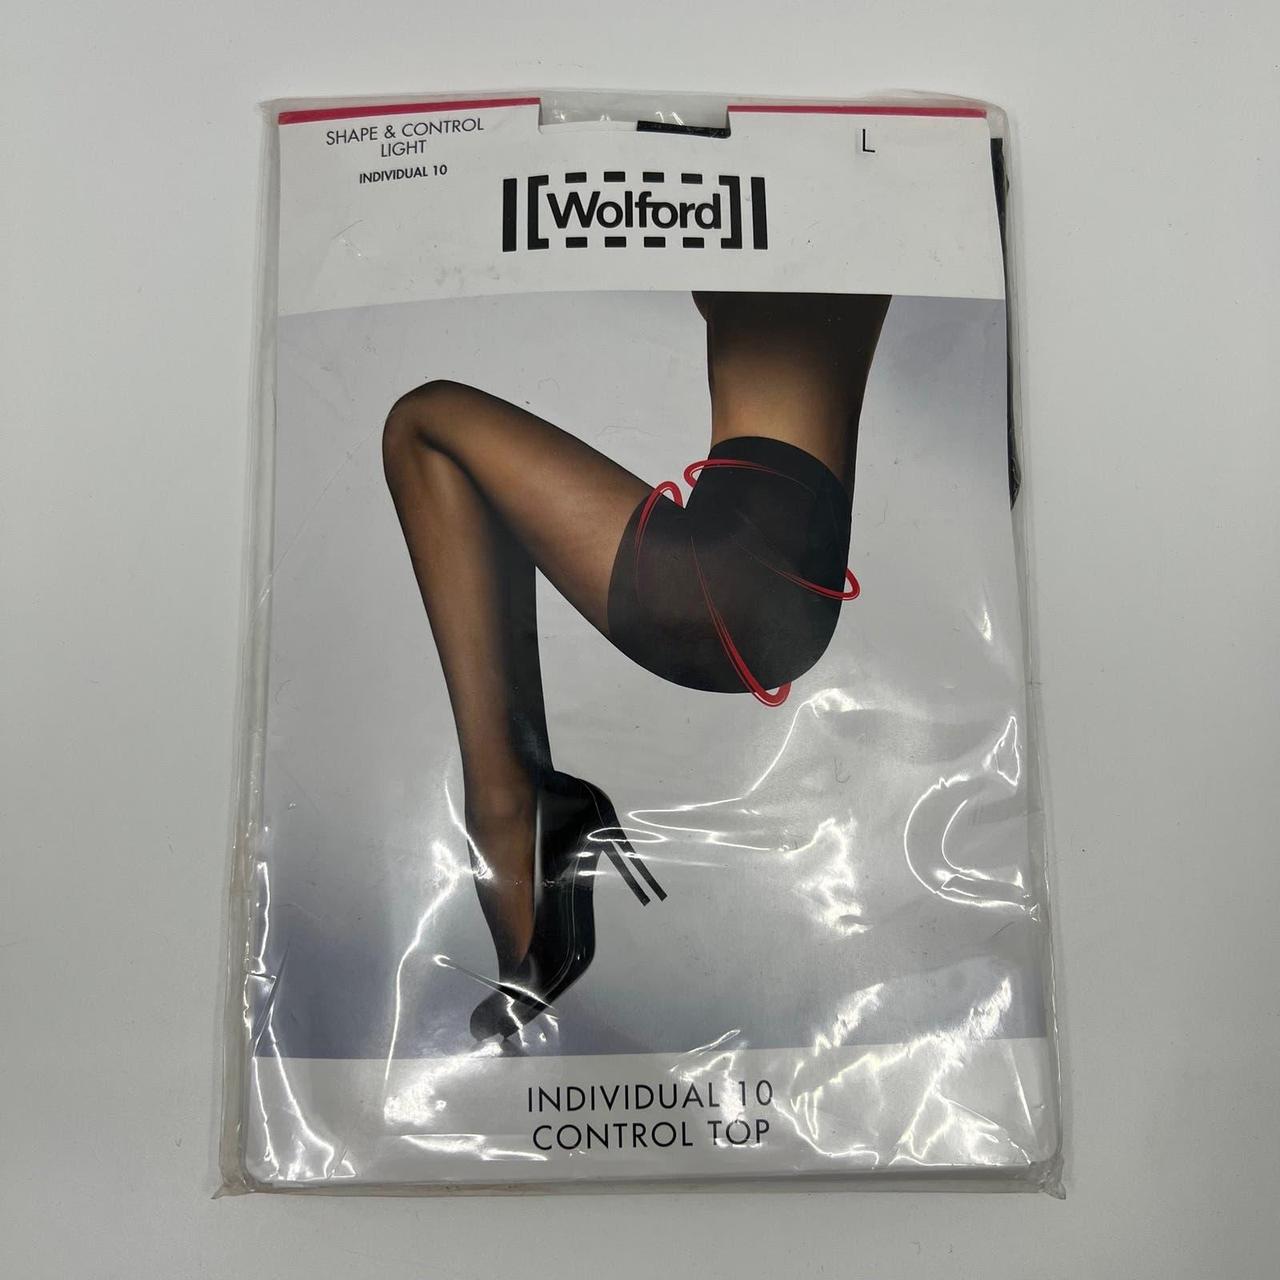 ⭐️ WOLFORD STAY UP's - LIMITED EDITION ⭐️ PLAYBOY - Depop